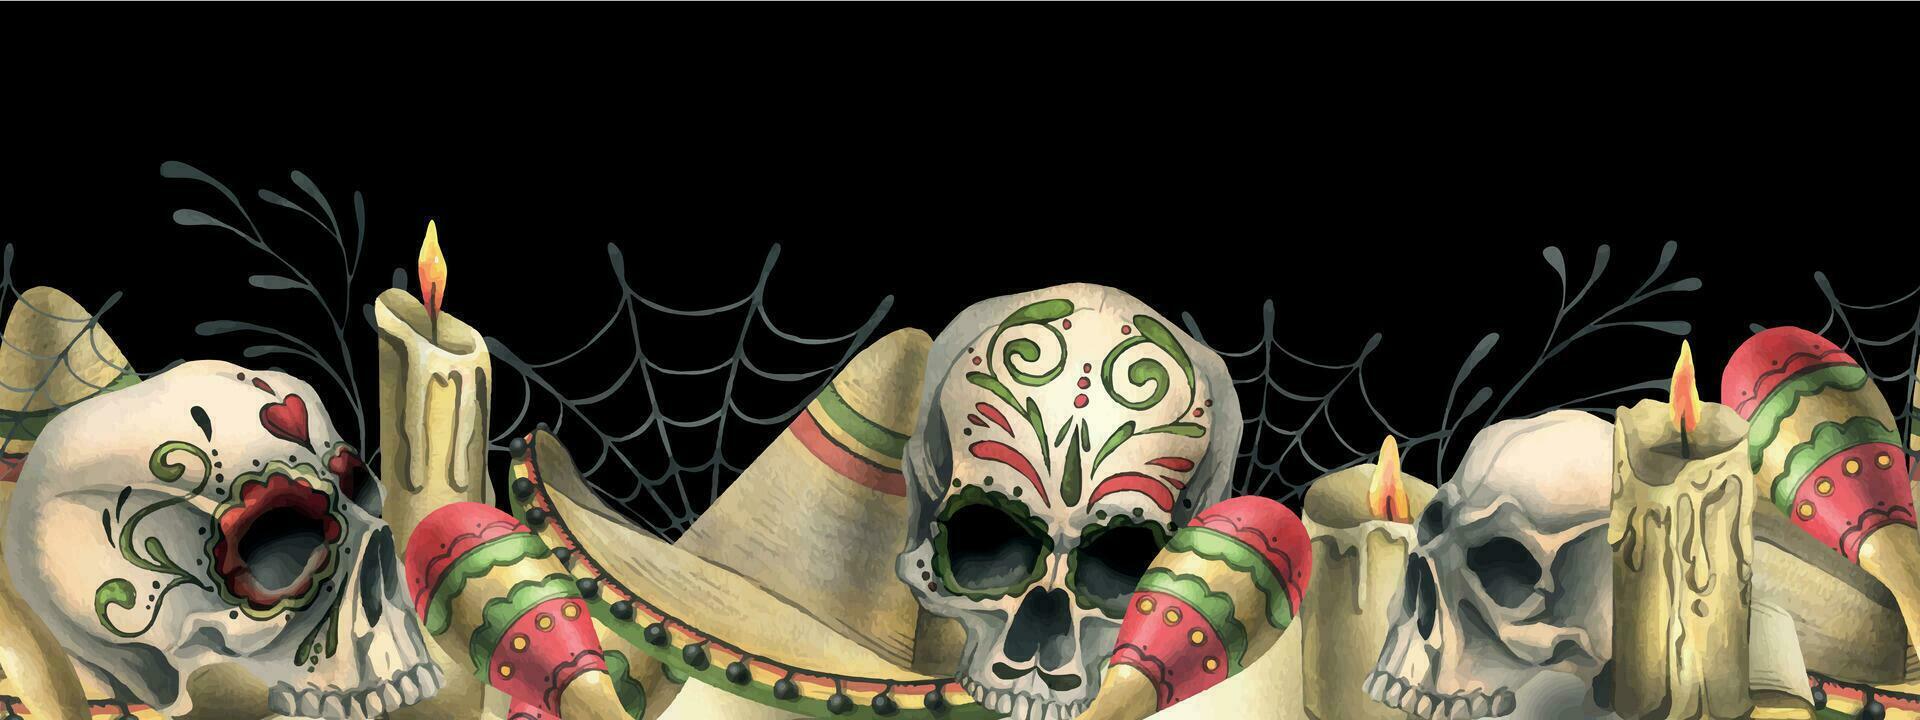 Ornamented human skull with a sombrero hat, maracas and candles. Hand drawn watercolor illustration for day of the dead, halloween, Dia de los muertos. Seamless border on a black background. vector